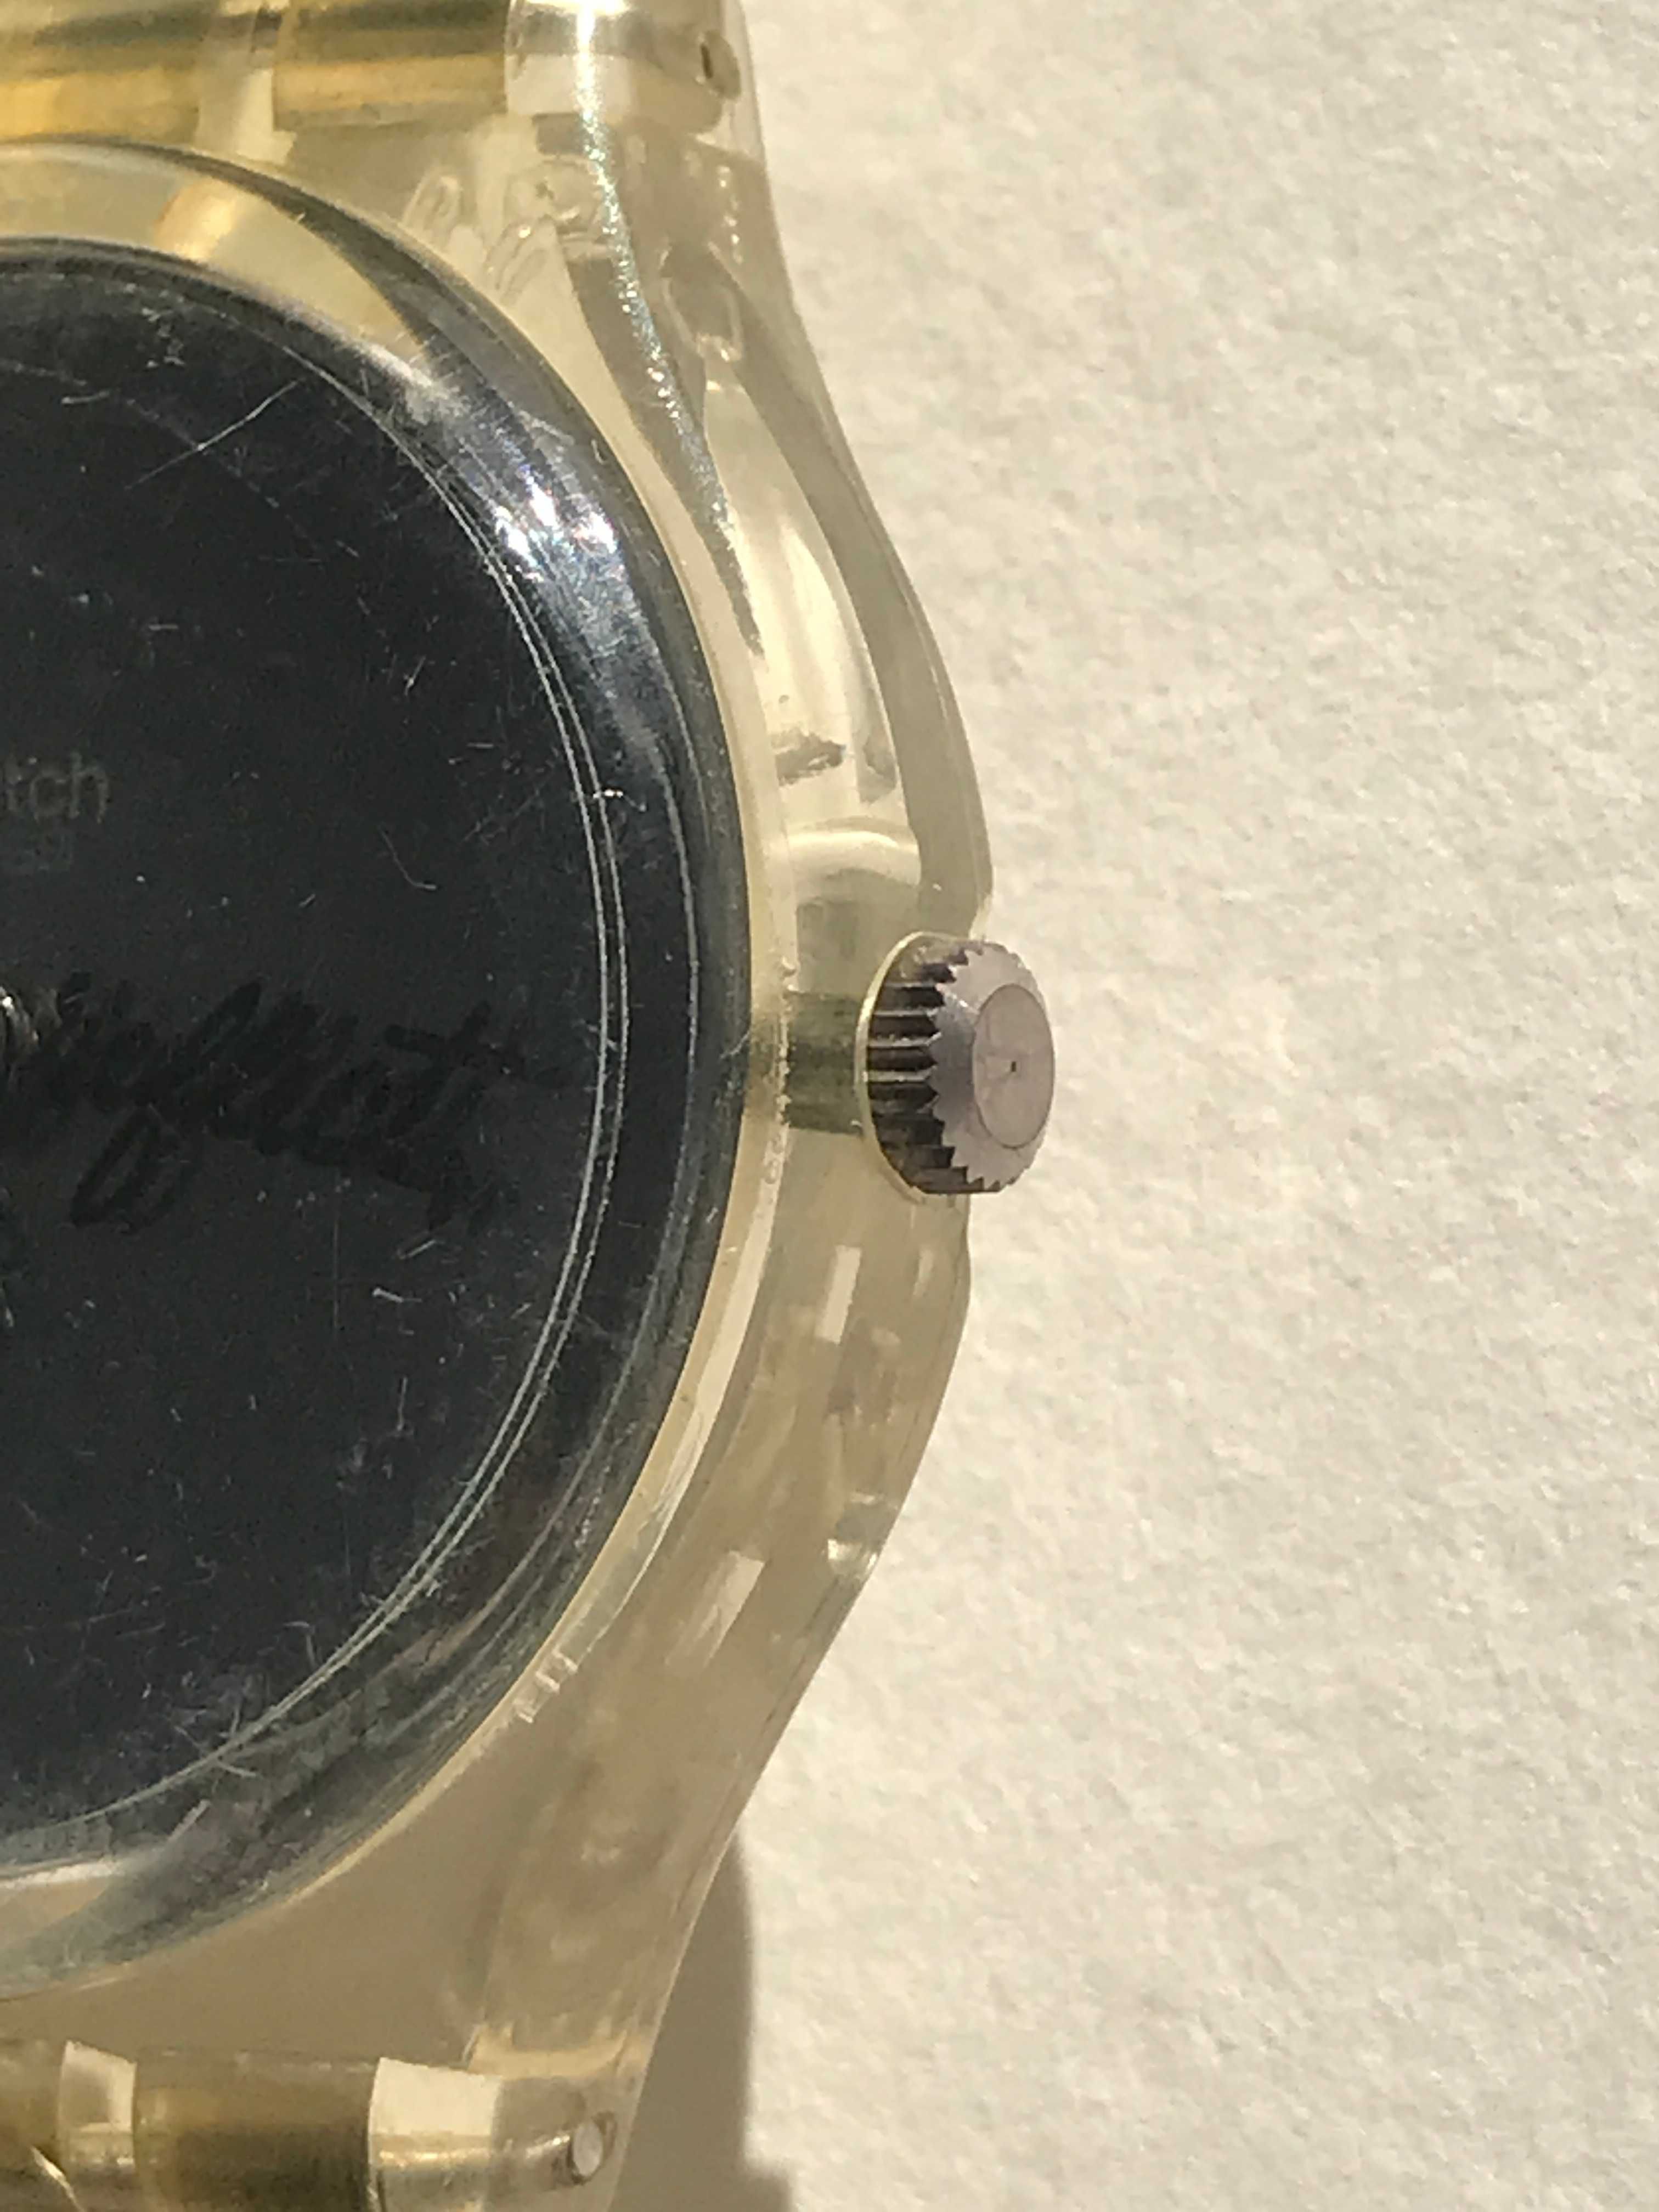 SWATCH Special 1995 – GZ143 – Time TO Reflect by Robert Altman